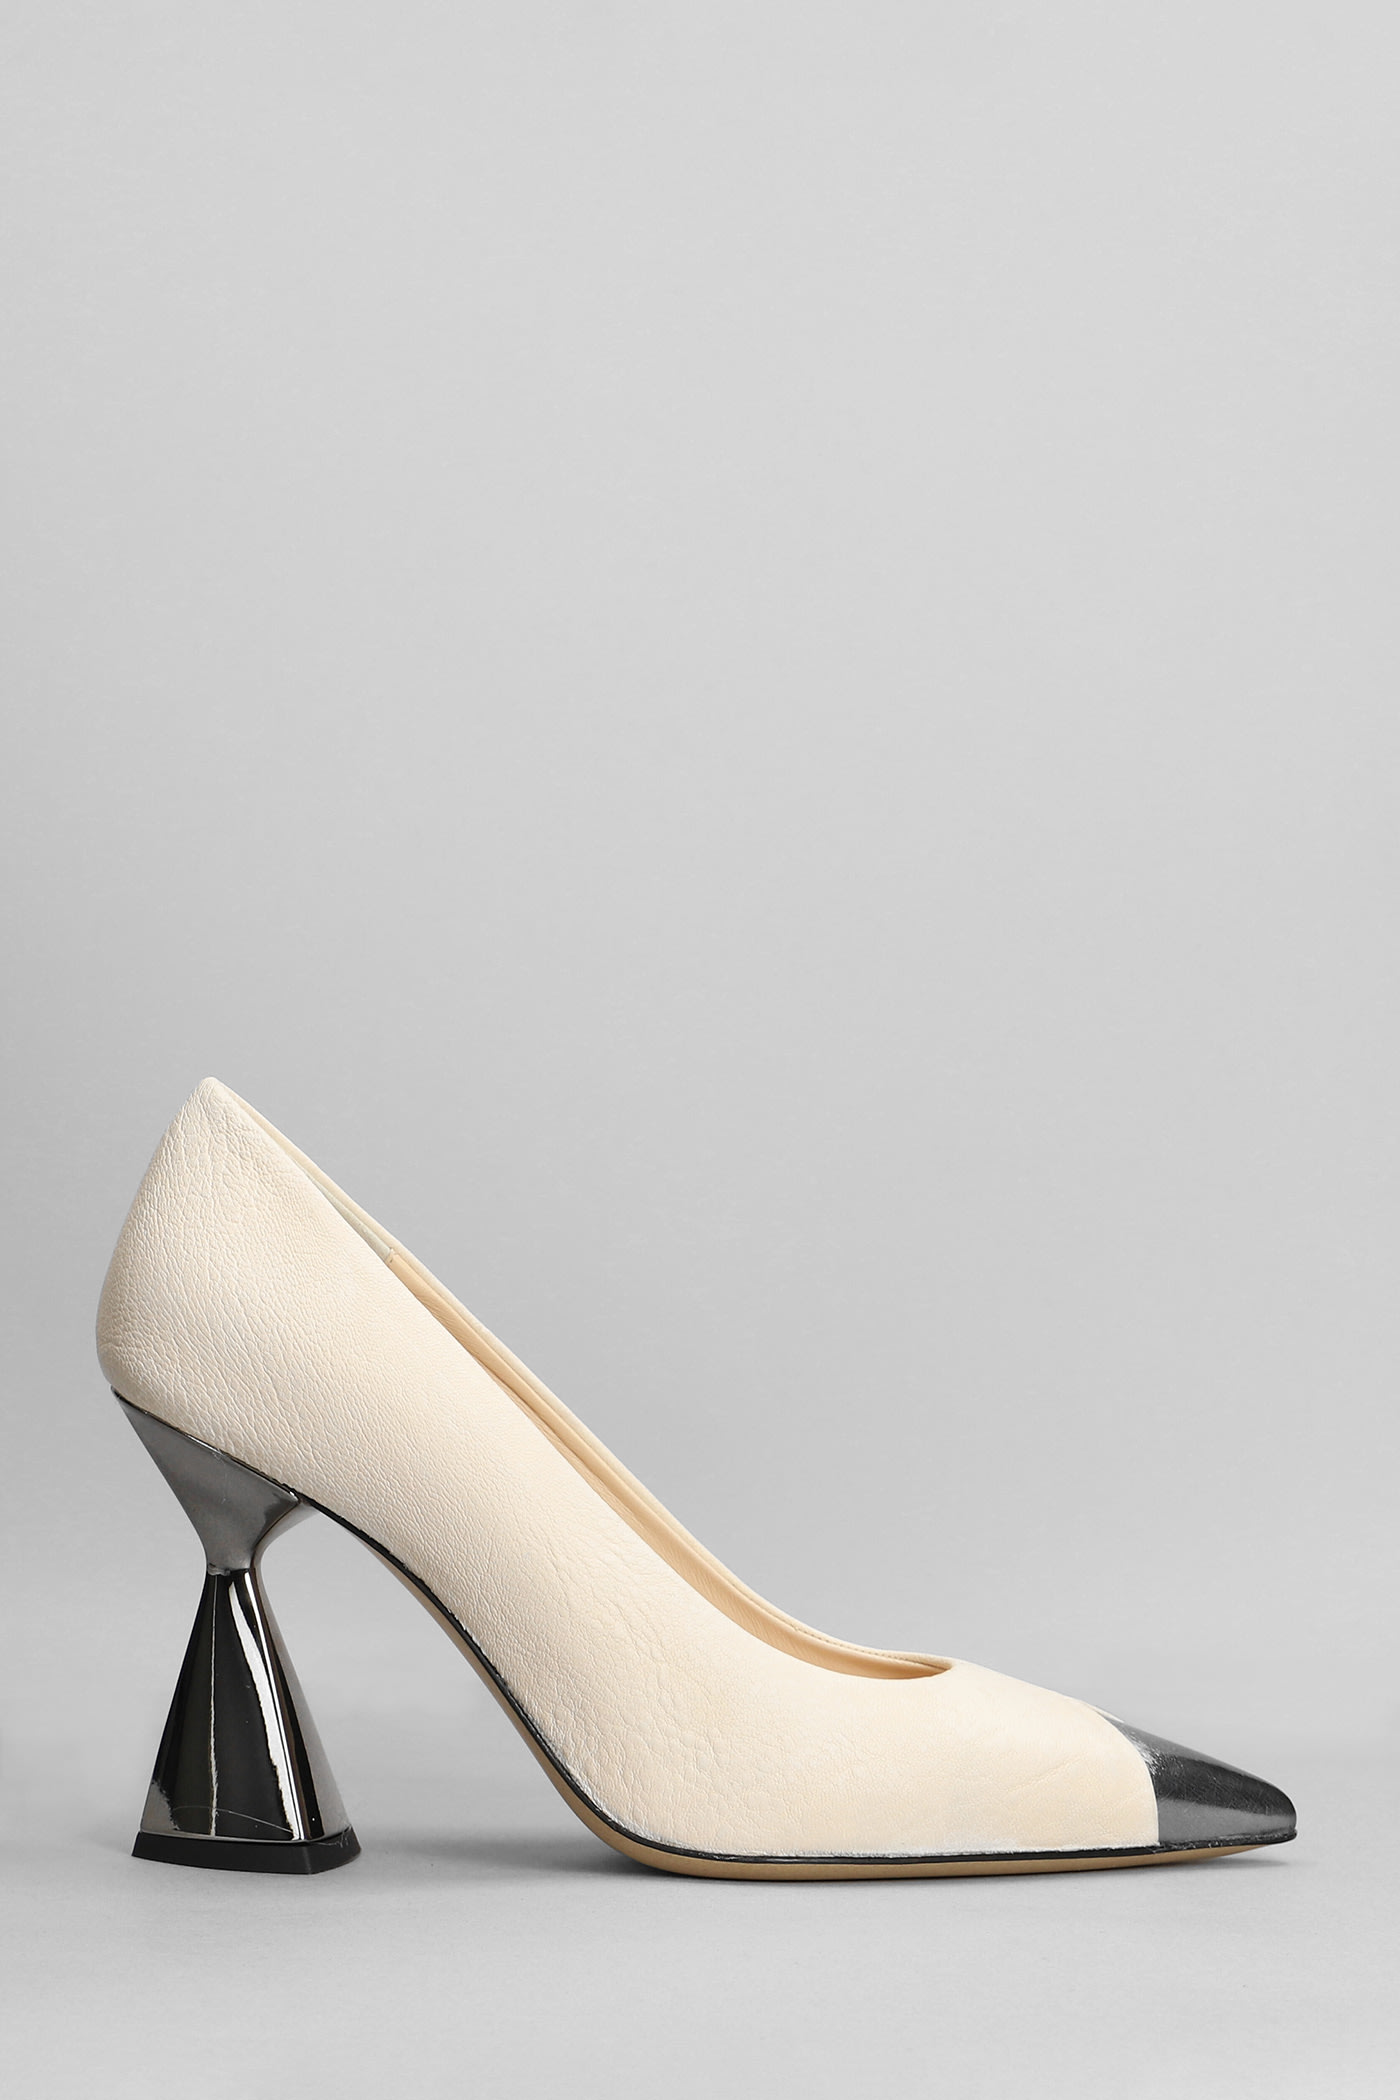 Alchimia Pumps In Beige Leather